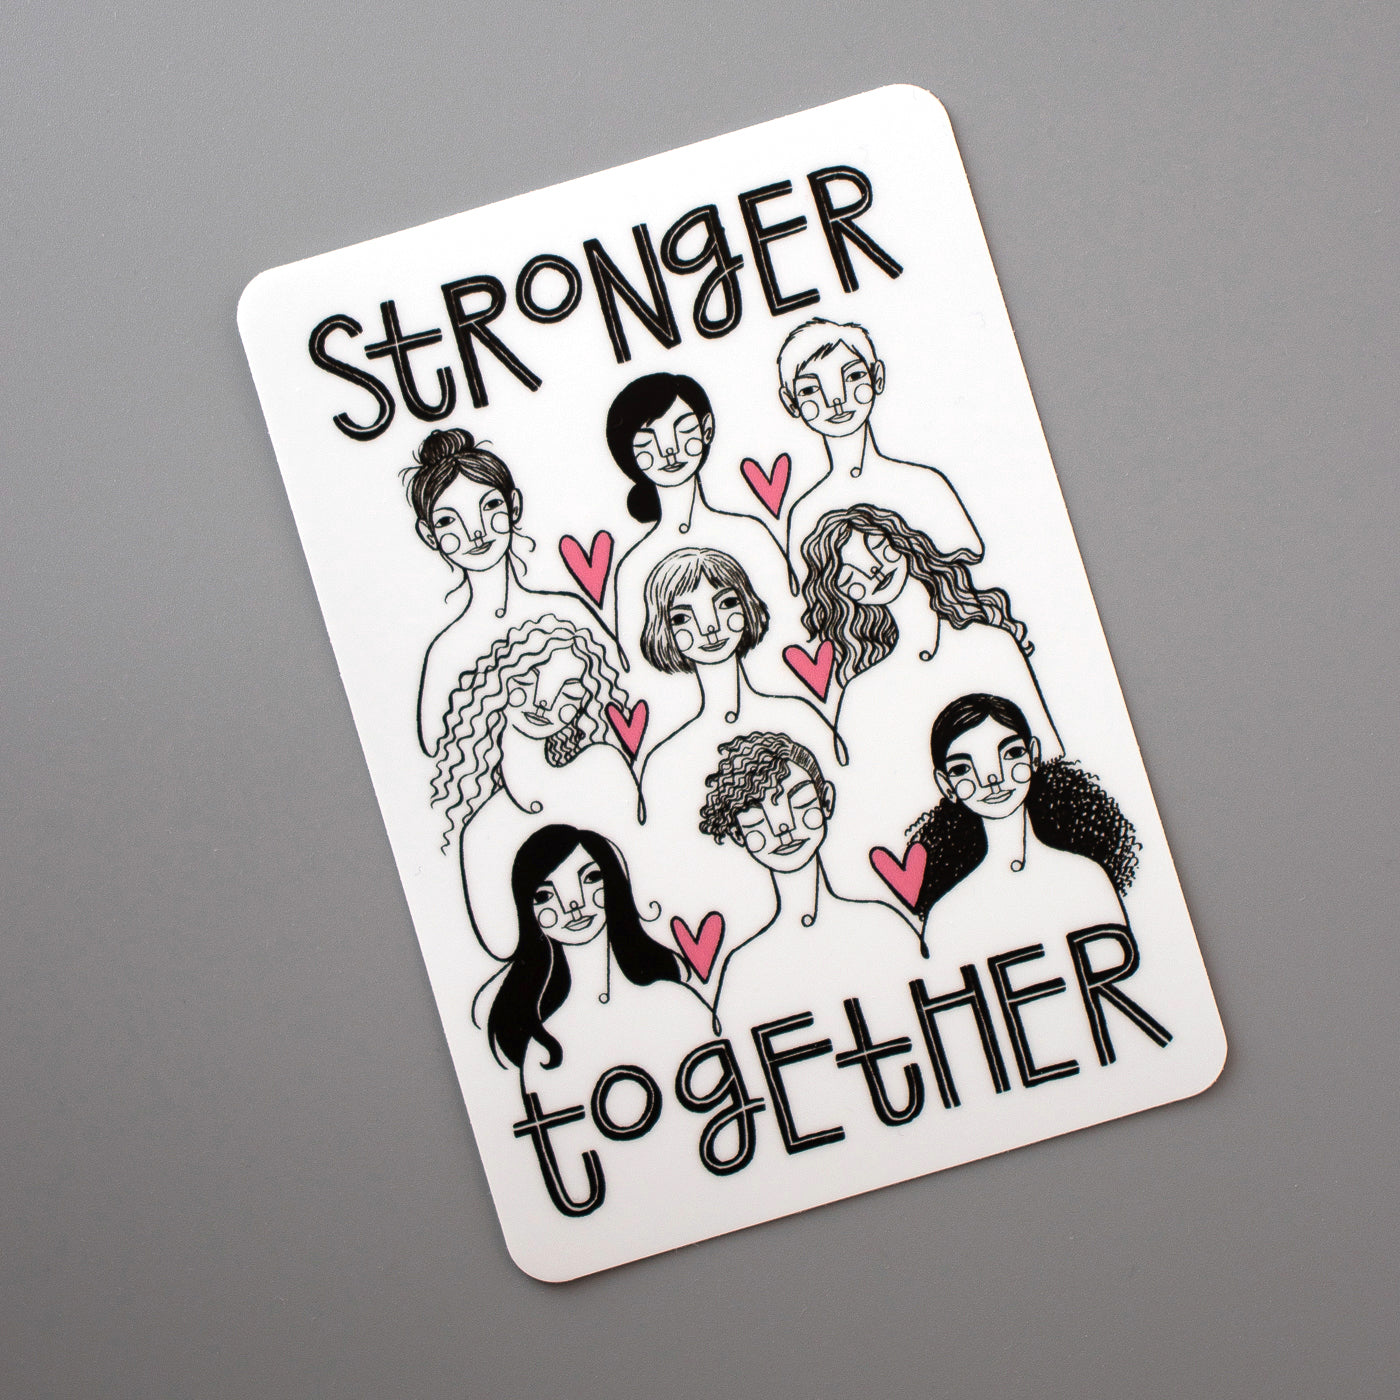 Stronger Together vinyl sticker from Make Lovely Things. Illustration by Kim Bonner features nine women with the words, "Stronger Together".